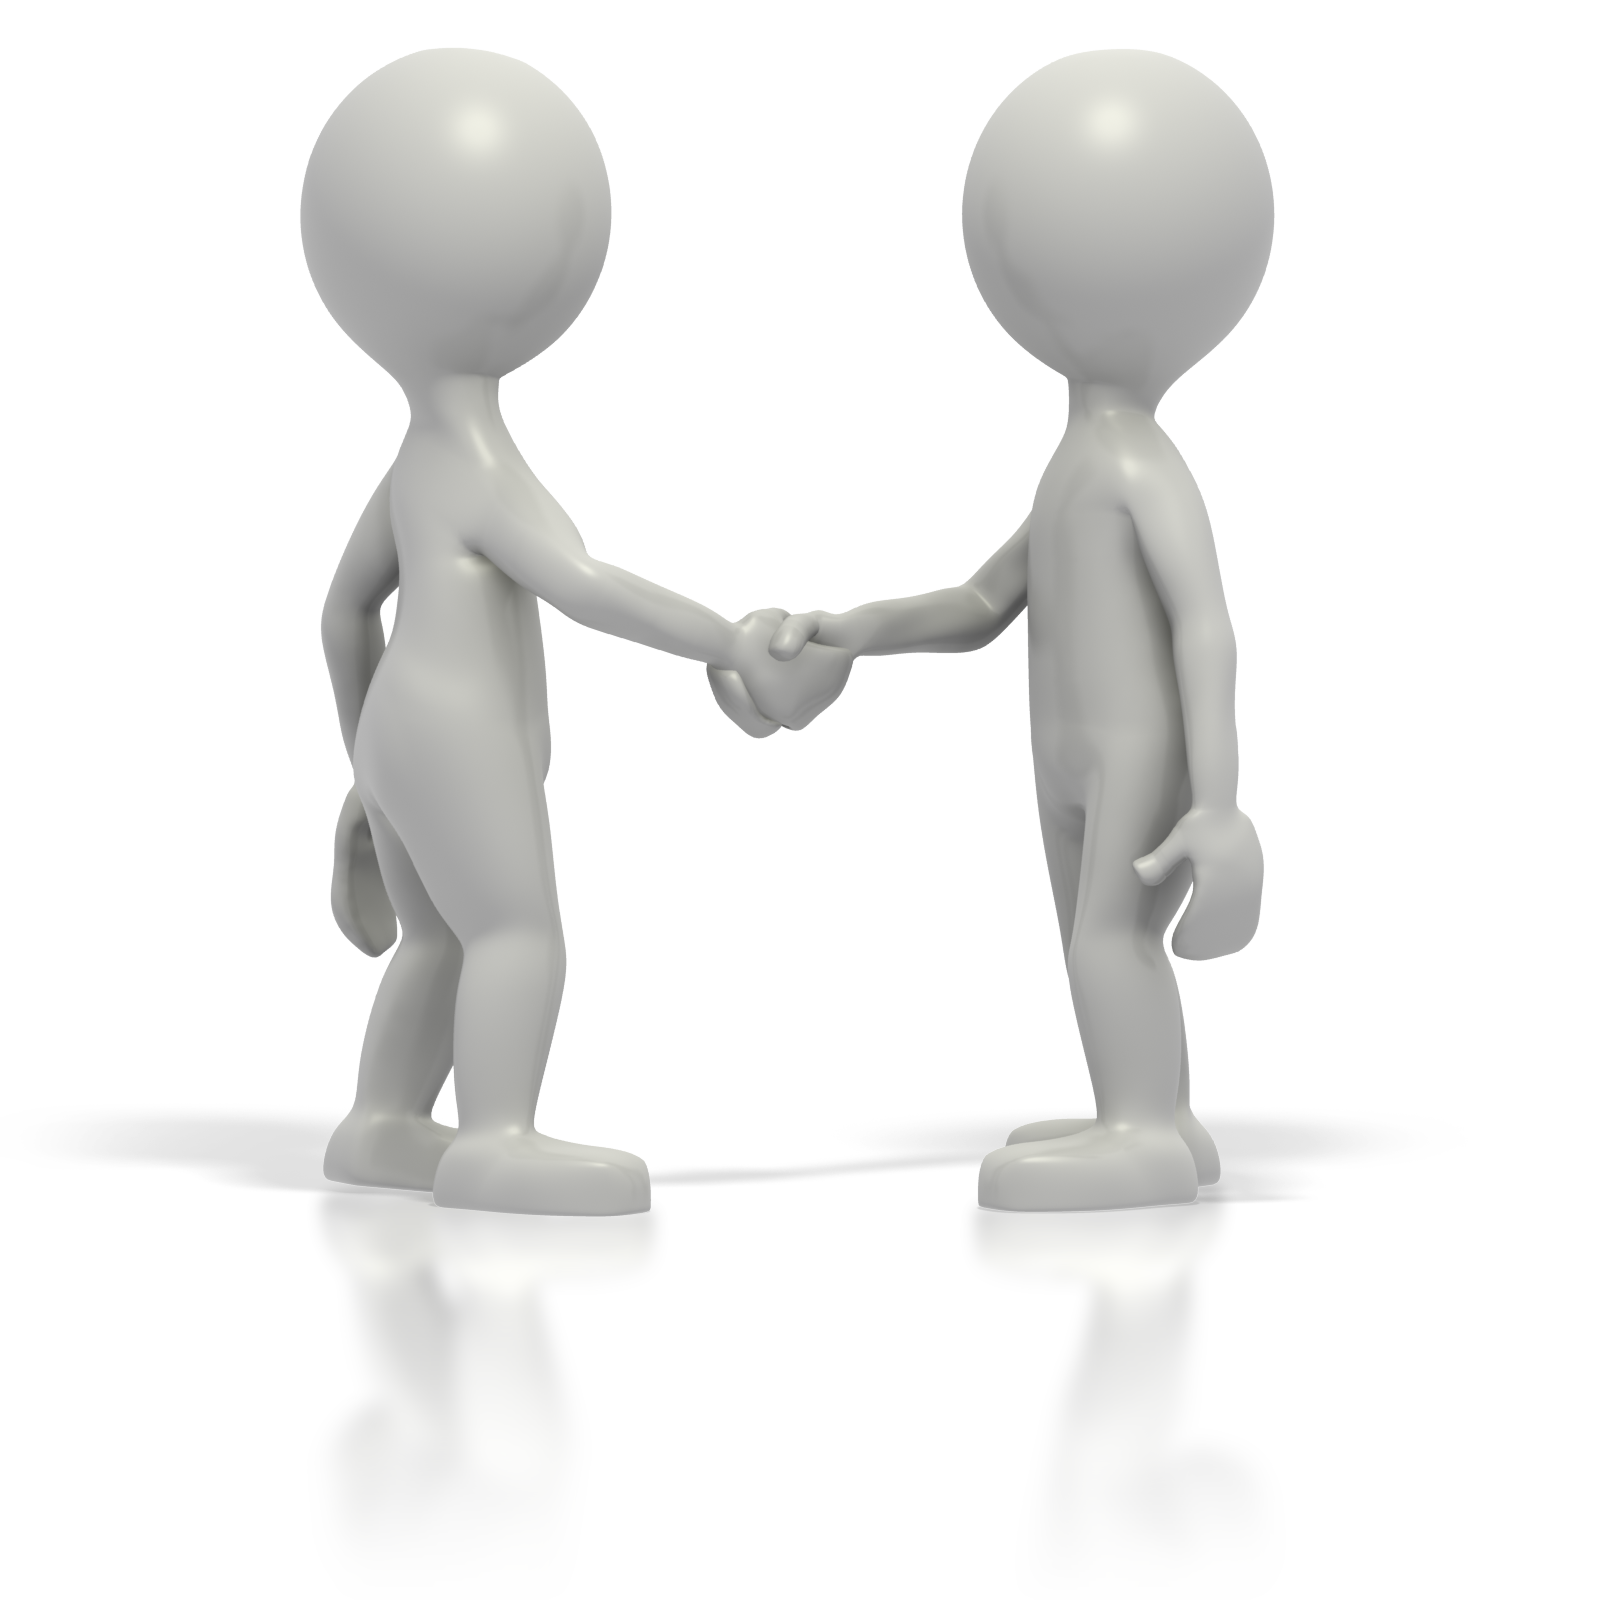 handshake clipart amicable